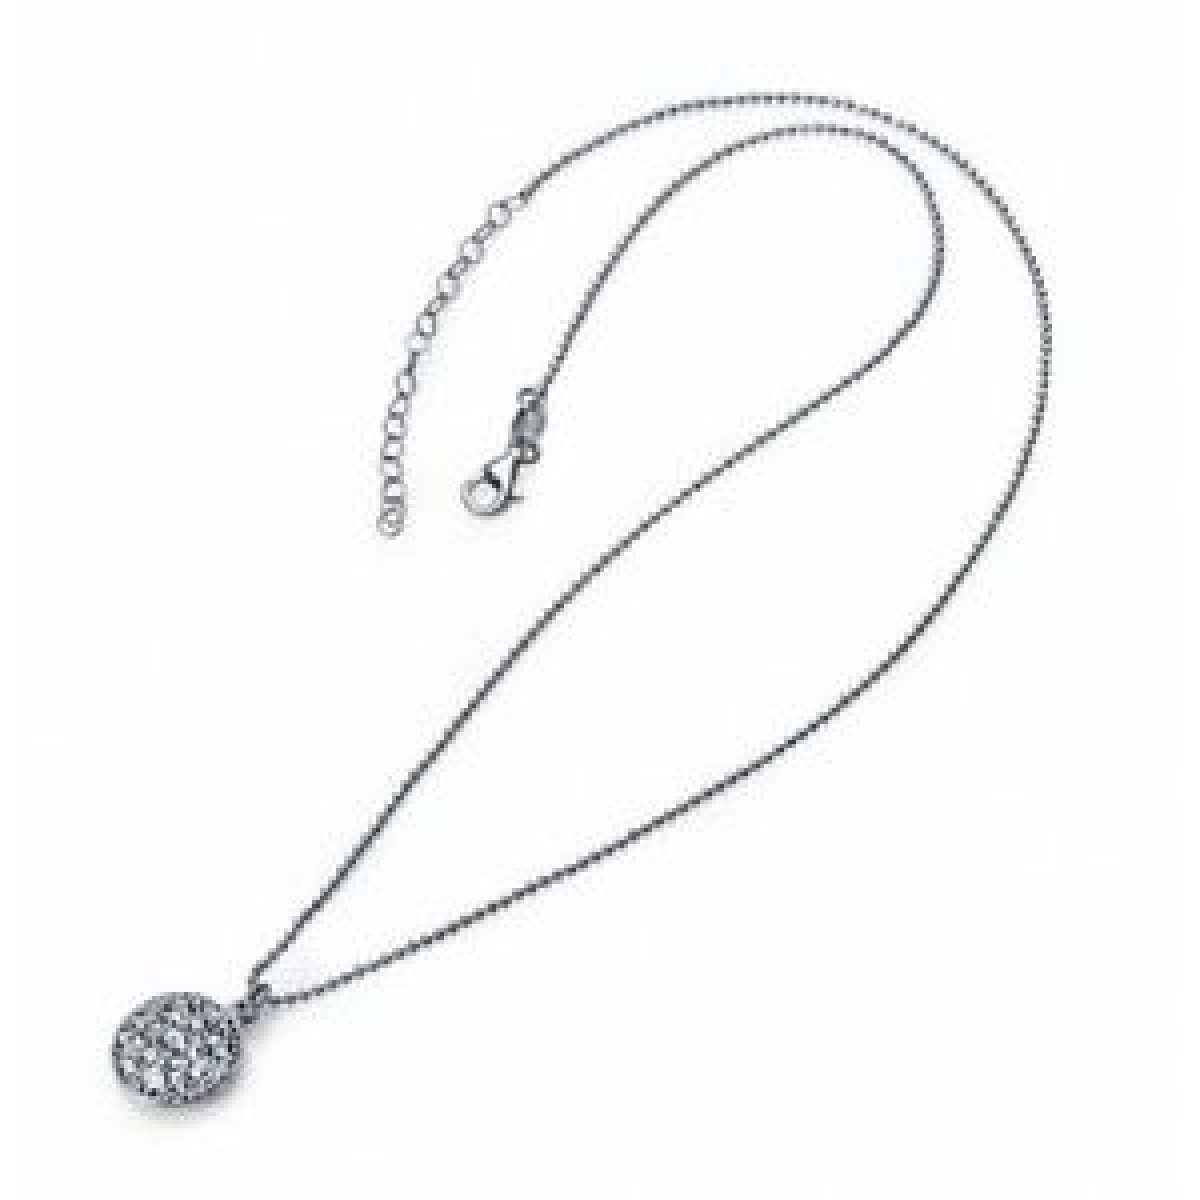 PENDANT NECKLACE STERLING SILVER RHODIUM AND ZIRCONS SRA JEW VICEROY 1194C000-30